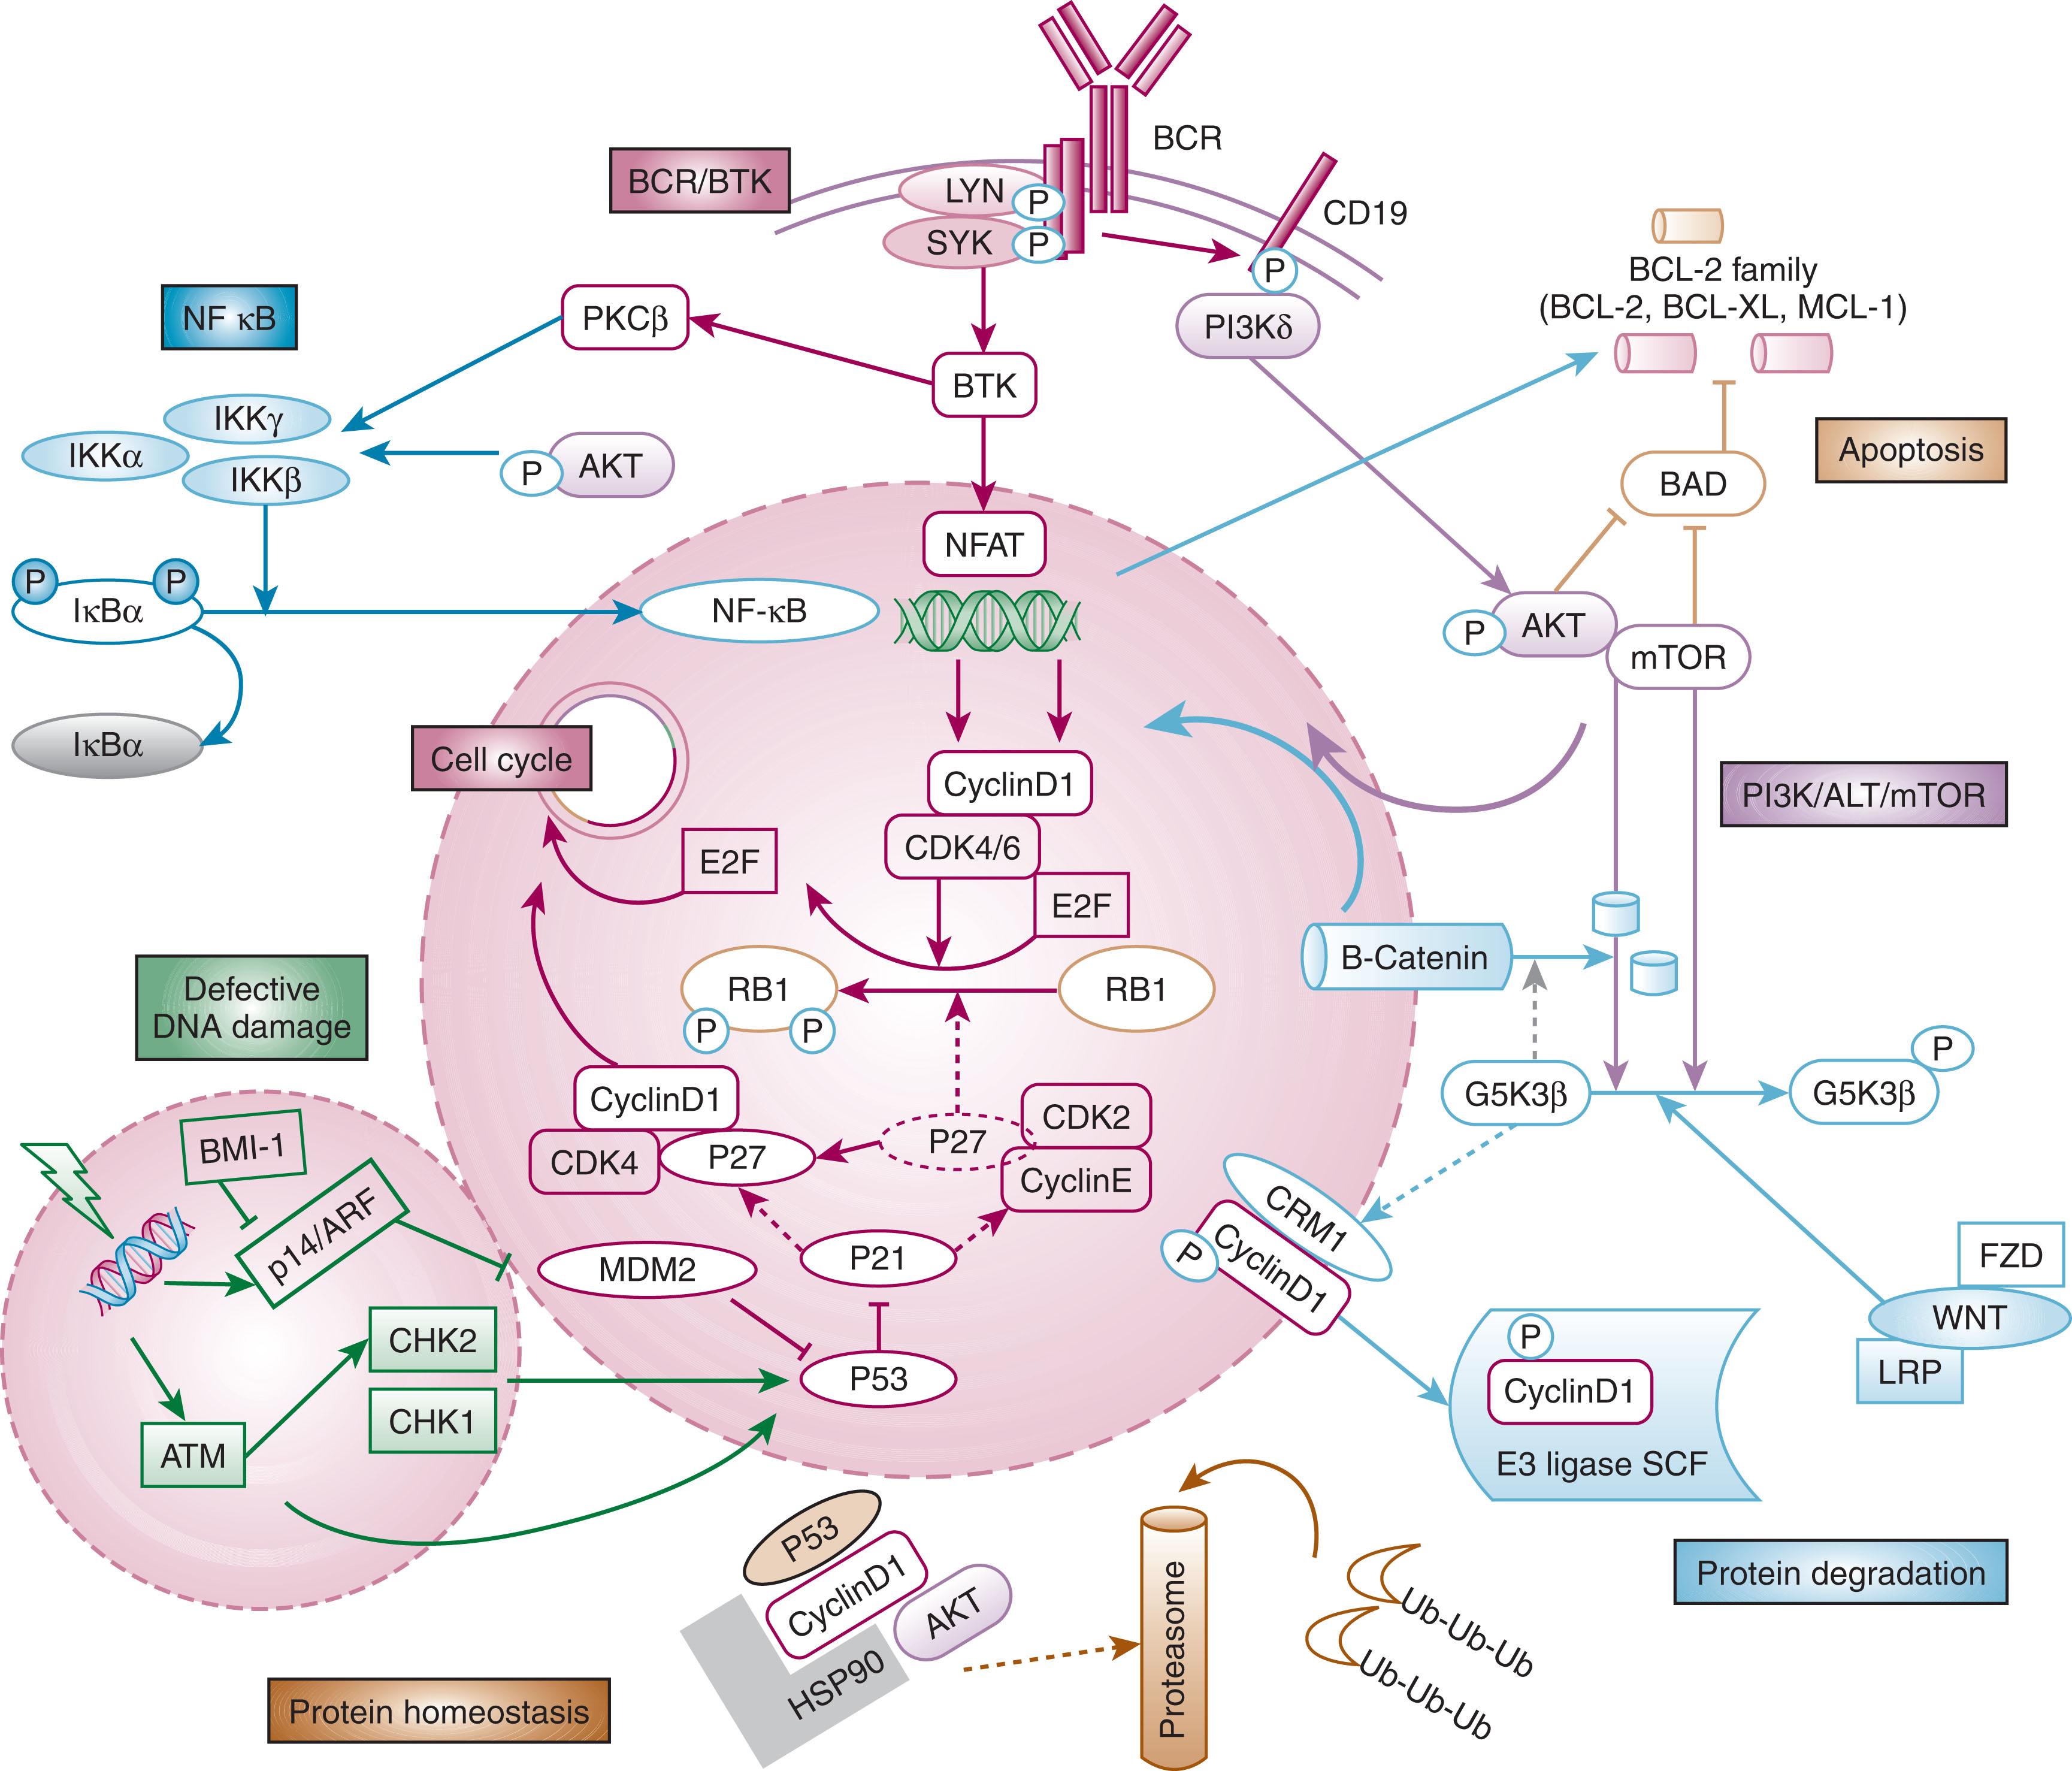 Figure 86.2, THE SIGNALING PATHWAYS CONTRIBUTING TO MANTLE CELL LYMPHOMA PATHOGENESIS.